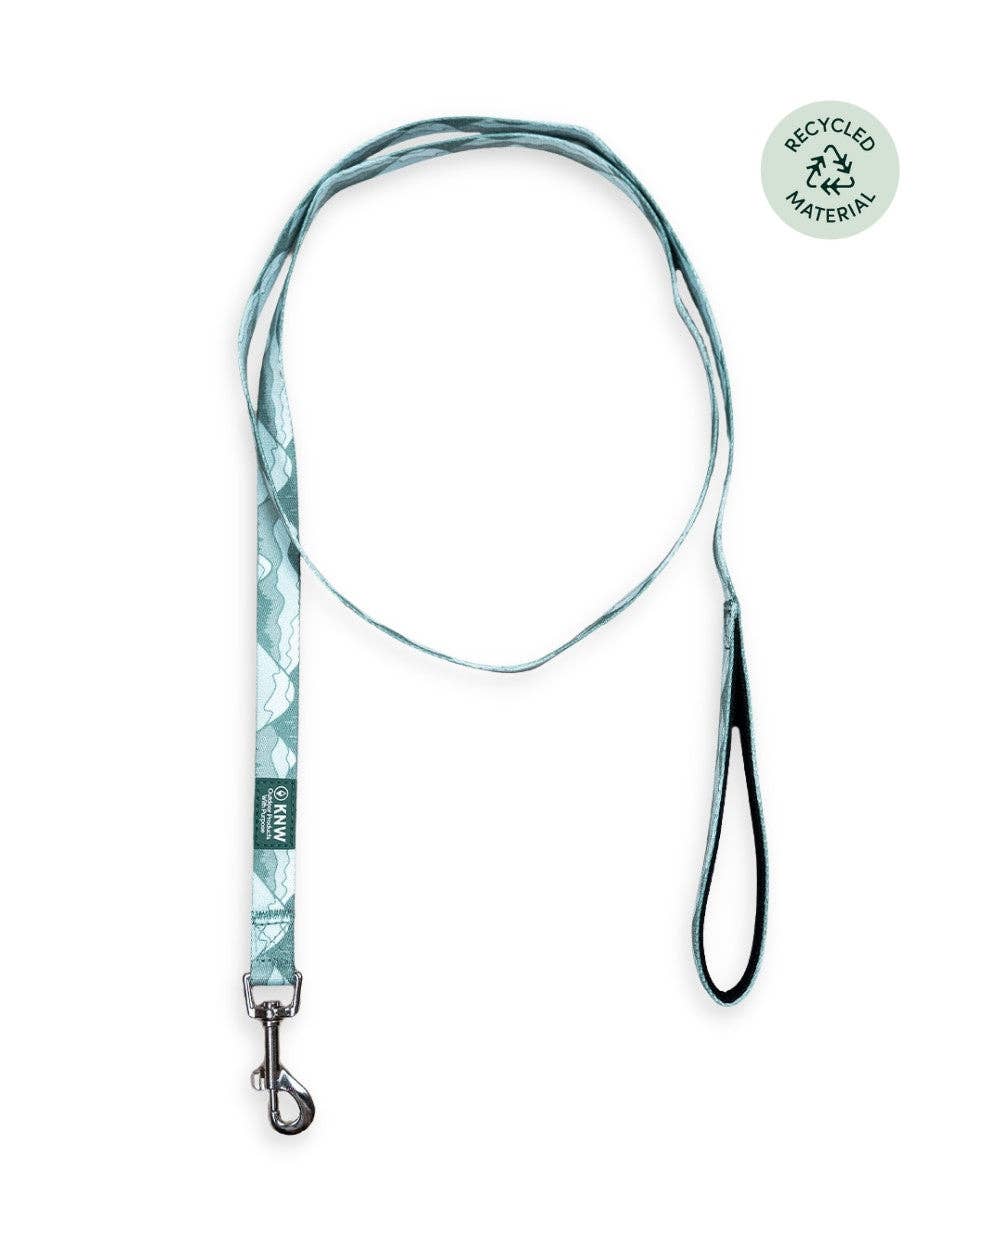 Recycled Dog Leash